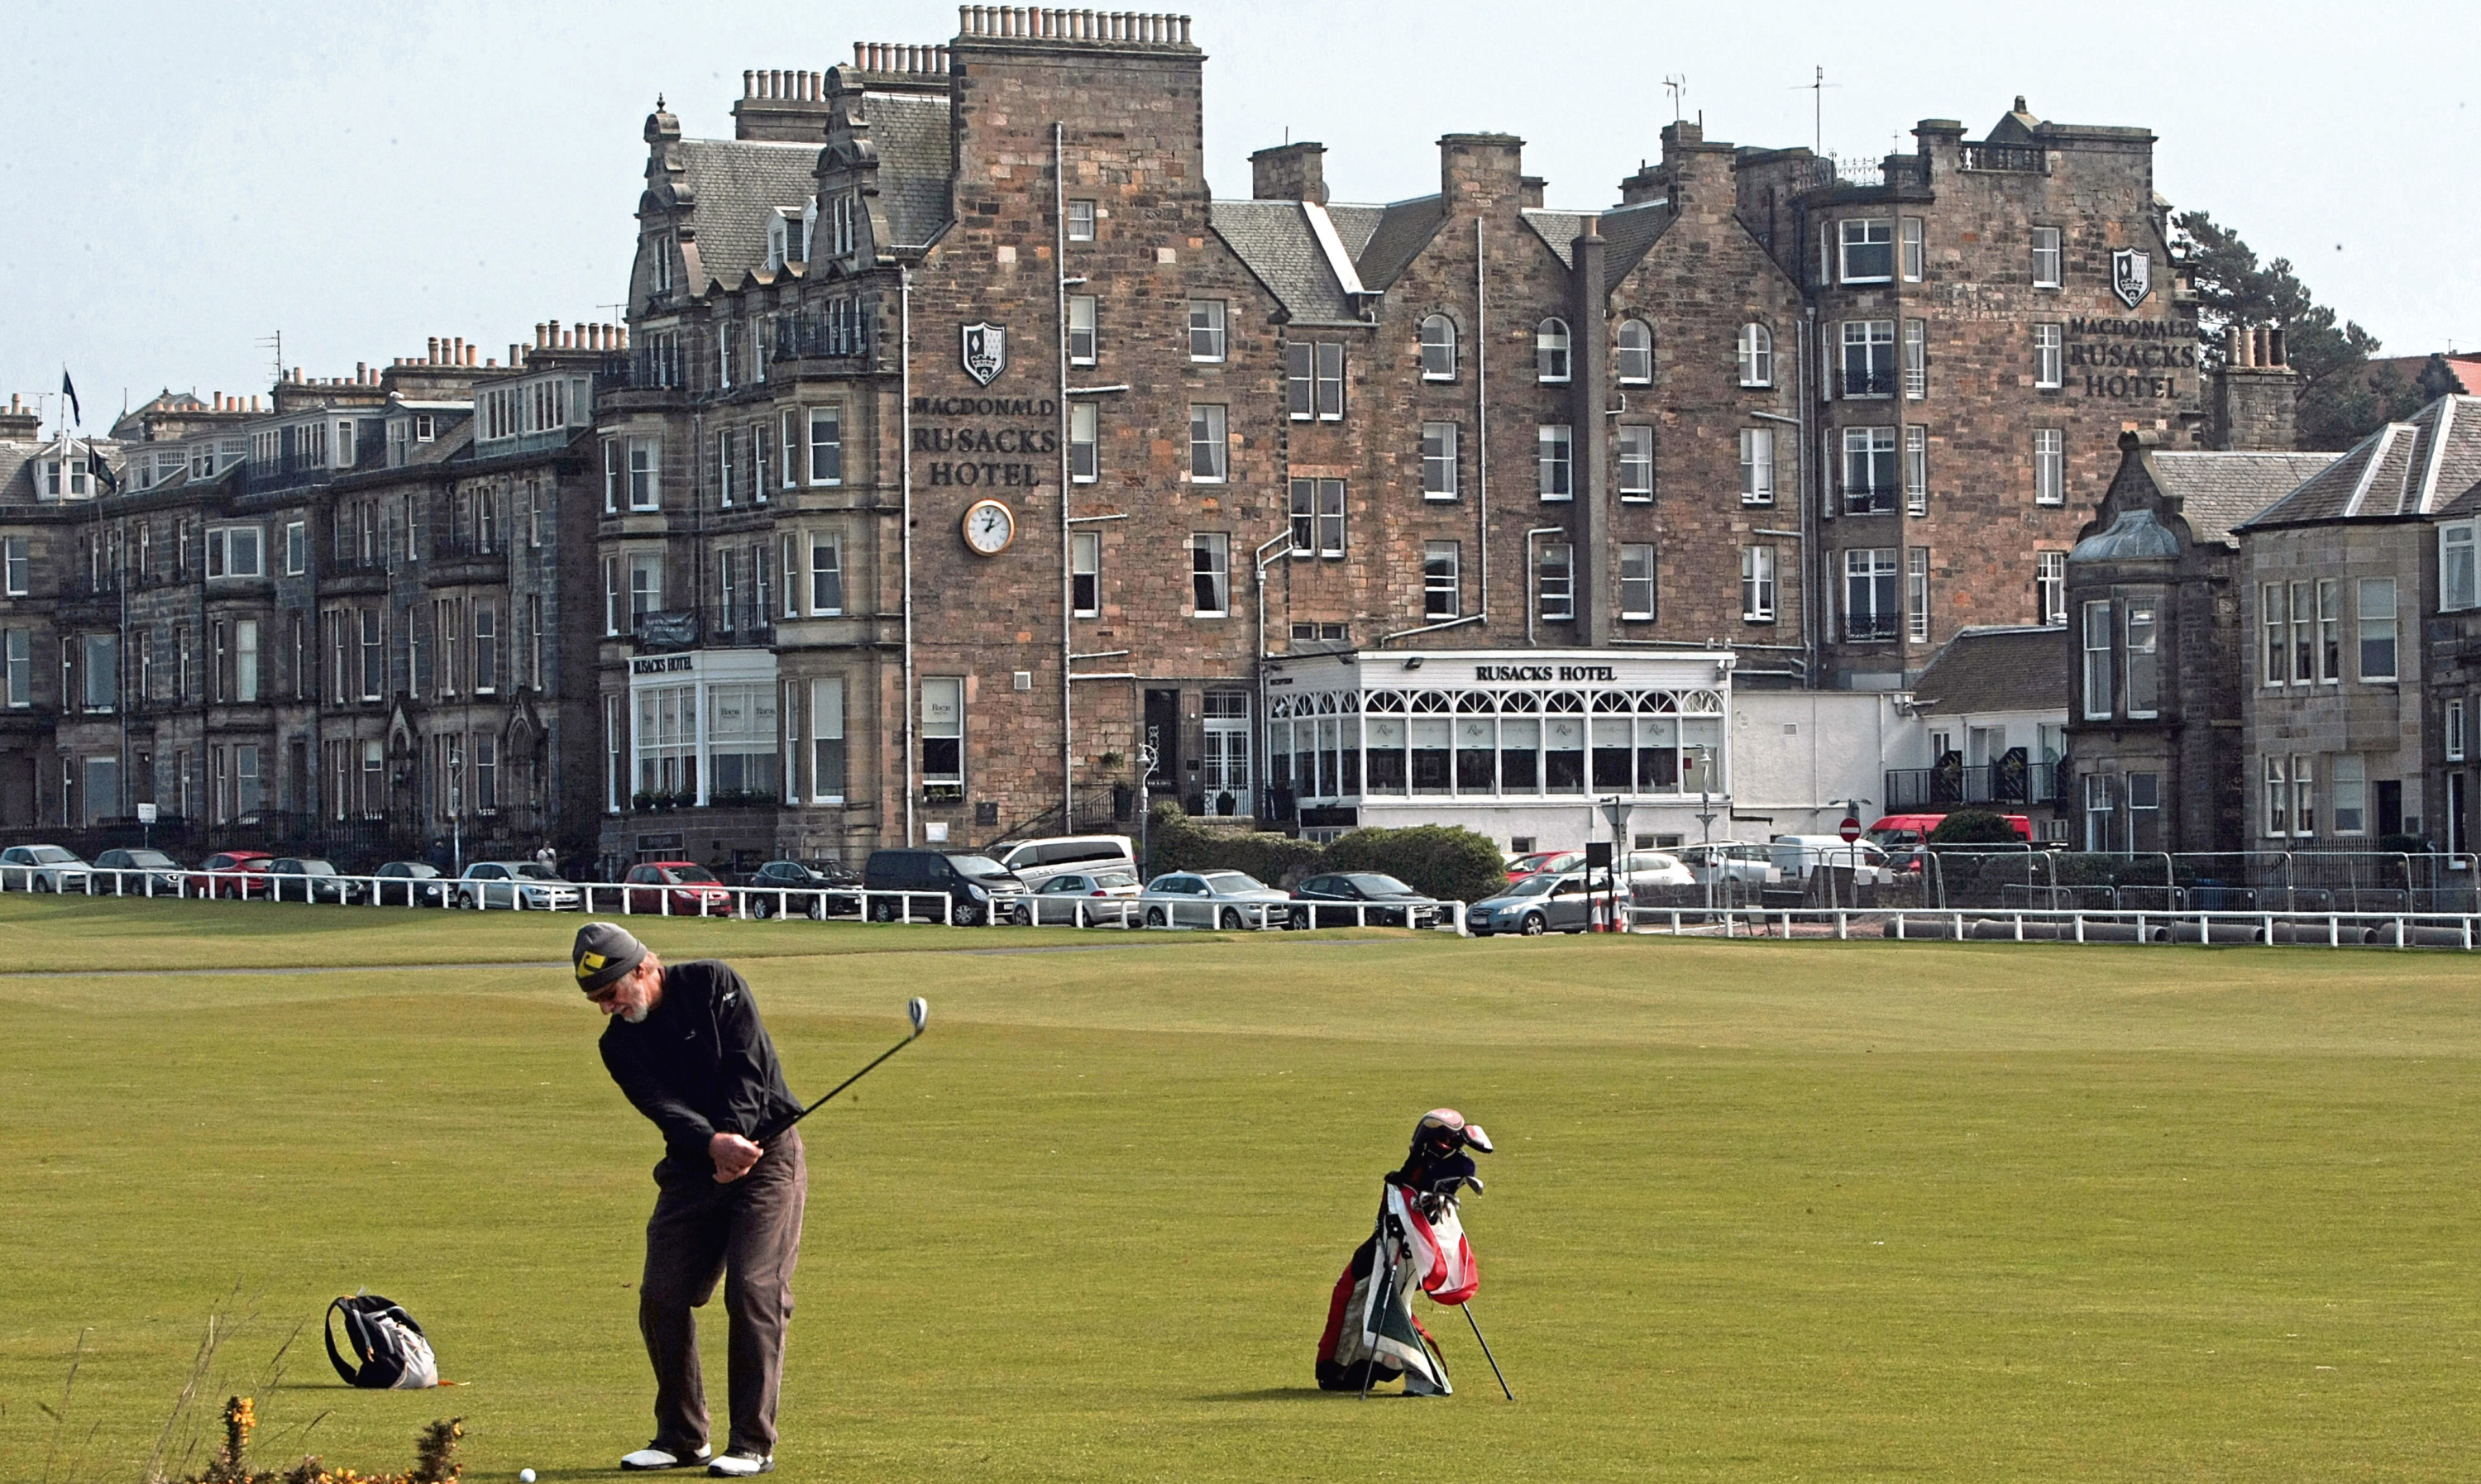 Rusacks Hotel in St Andrews, which overlooks the final hole of the Old Course.